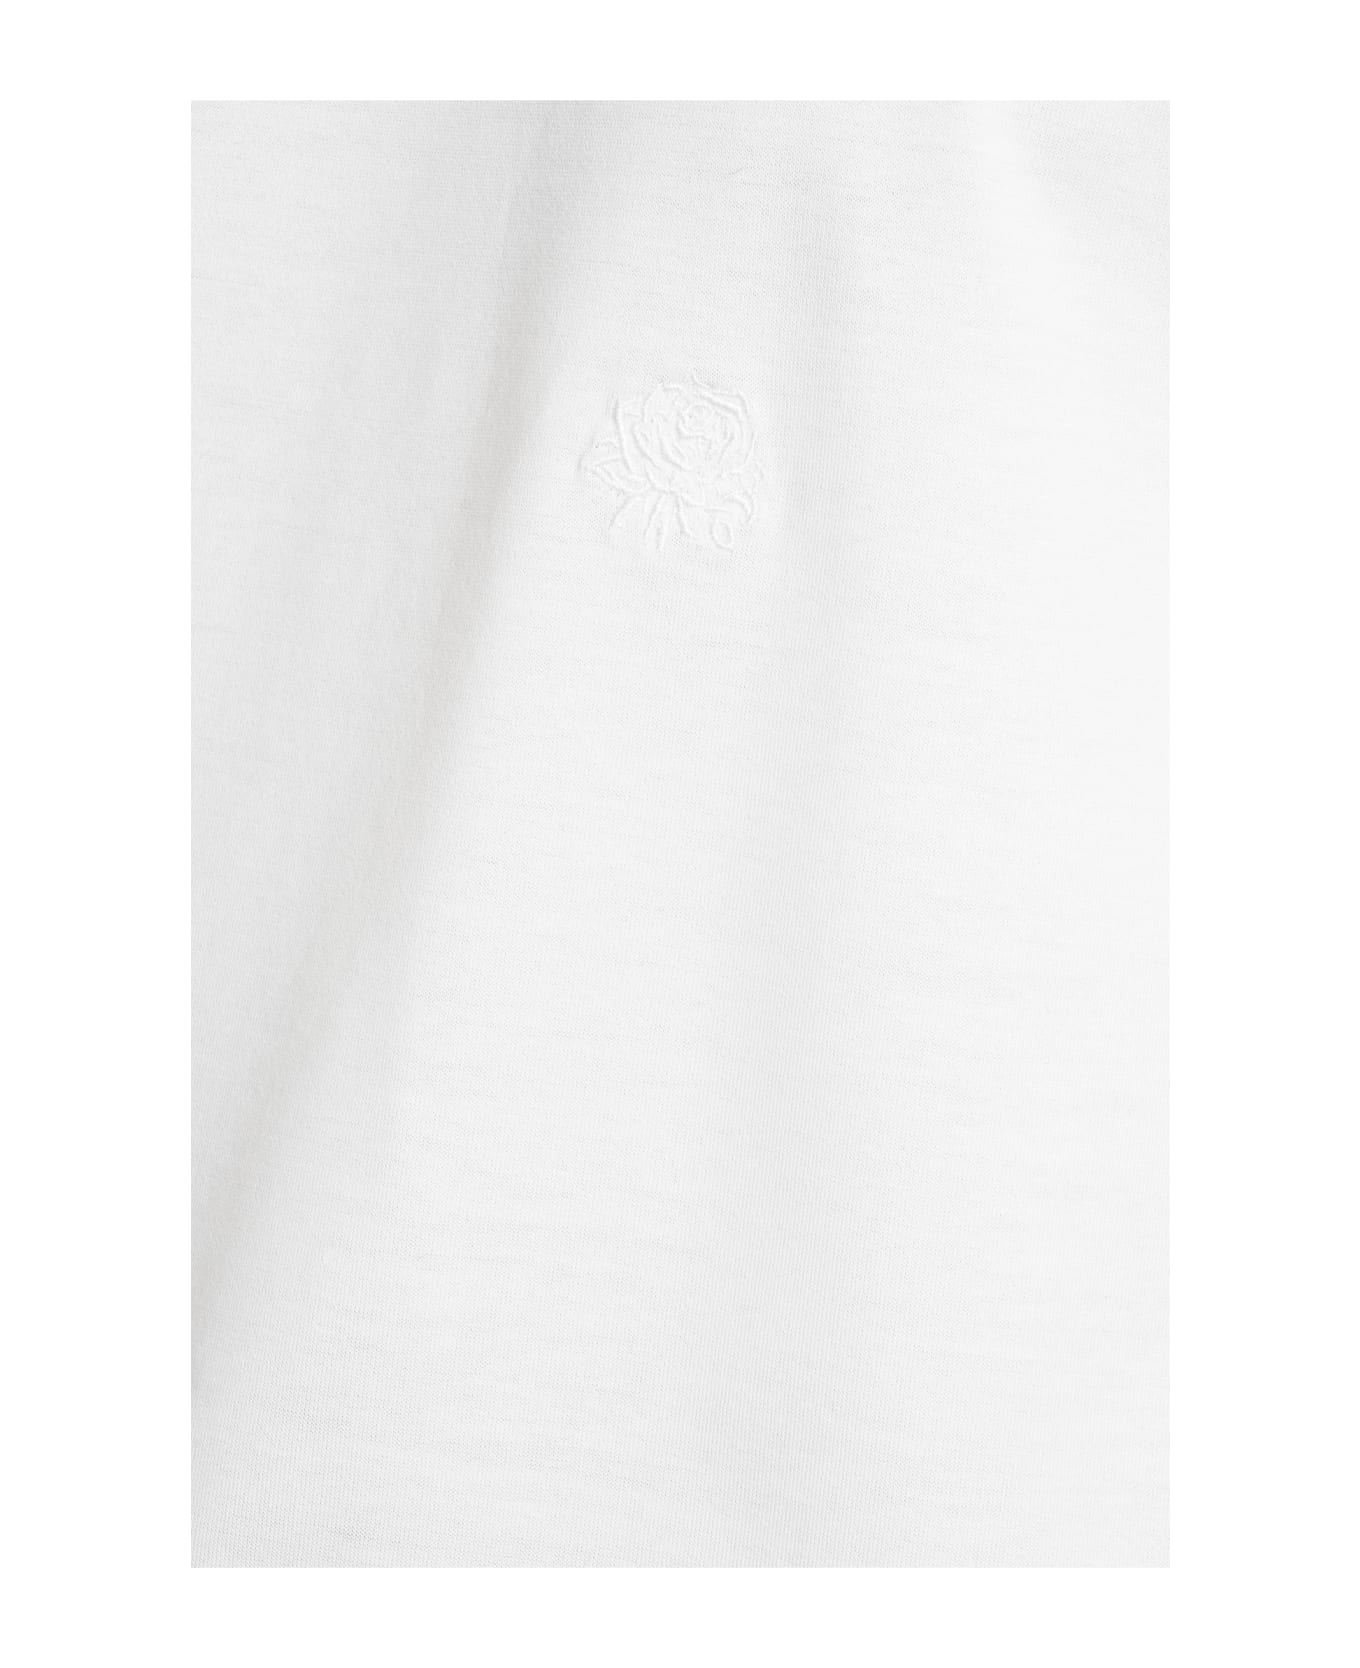 Low Brand B150 Embroidery T-shirt In White Cotton - white シャツ